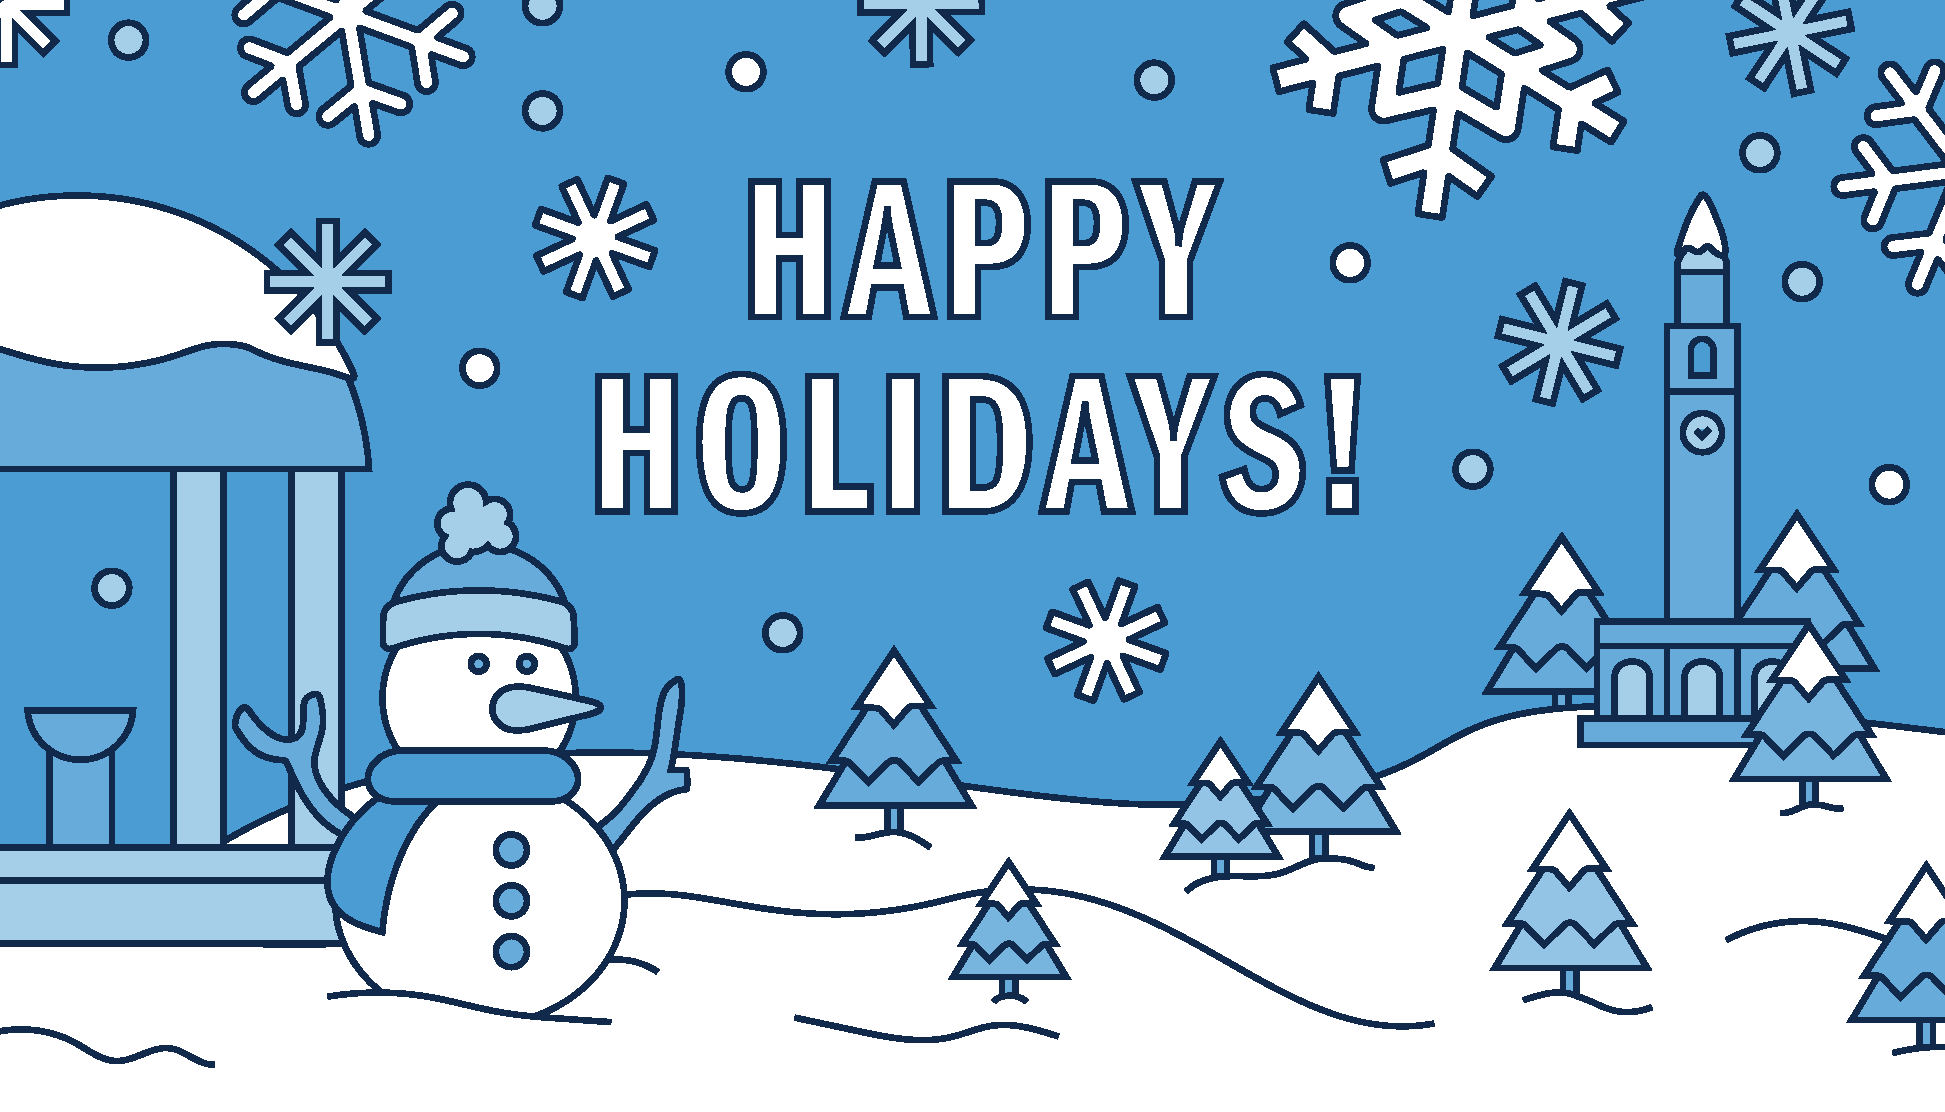 Happy Holidays from Carolina - The University of North Carolina at Chapel  Hill. The image features a blue and white graphic of buildings covered in snow. These buildings are surrounded by snow covered land and trees. In the foreground, you can see a snowman with a scarf and hat. 